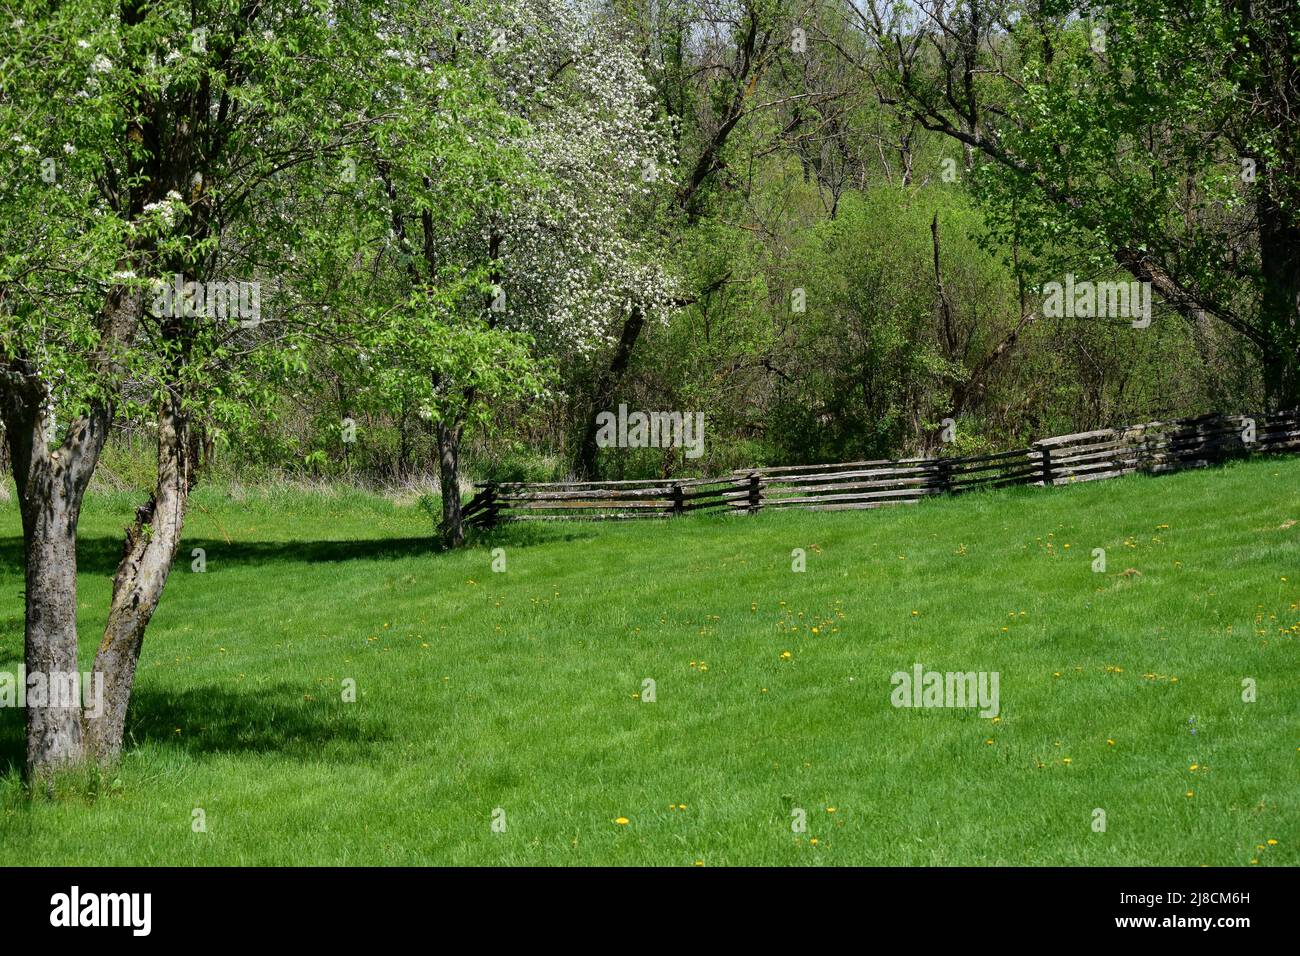 An old fence line among the trees in an open area at a local county park in Dane County Wisconsin. Stock Photo